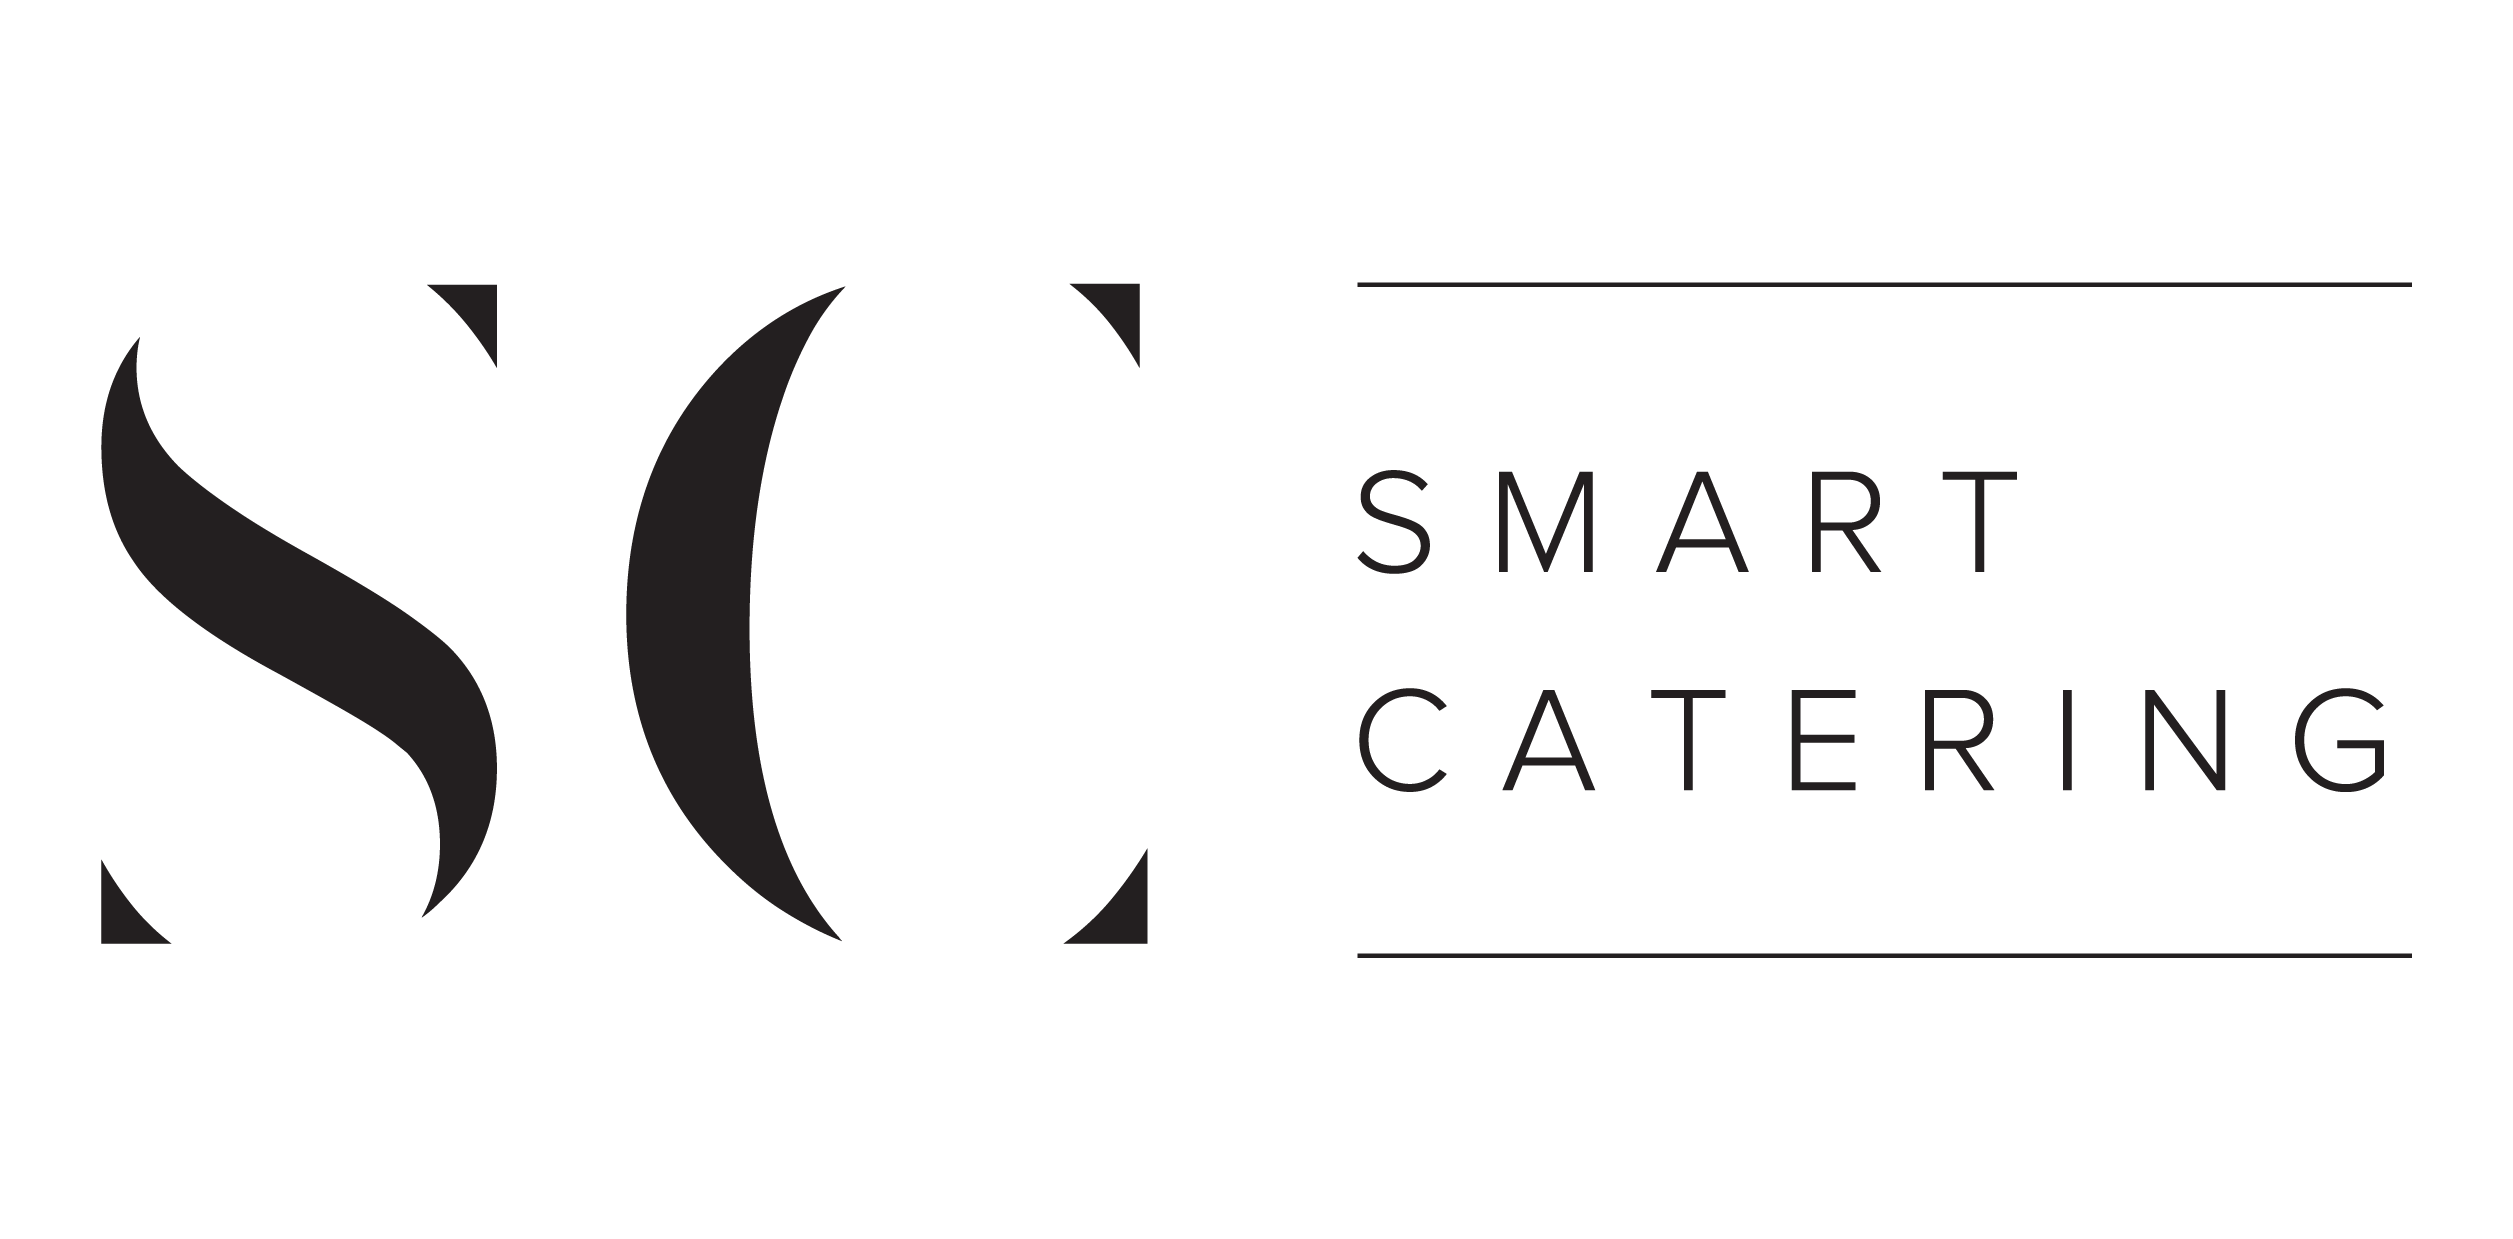 Smart Catering